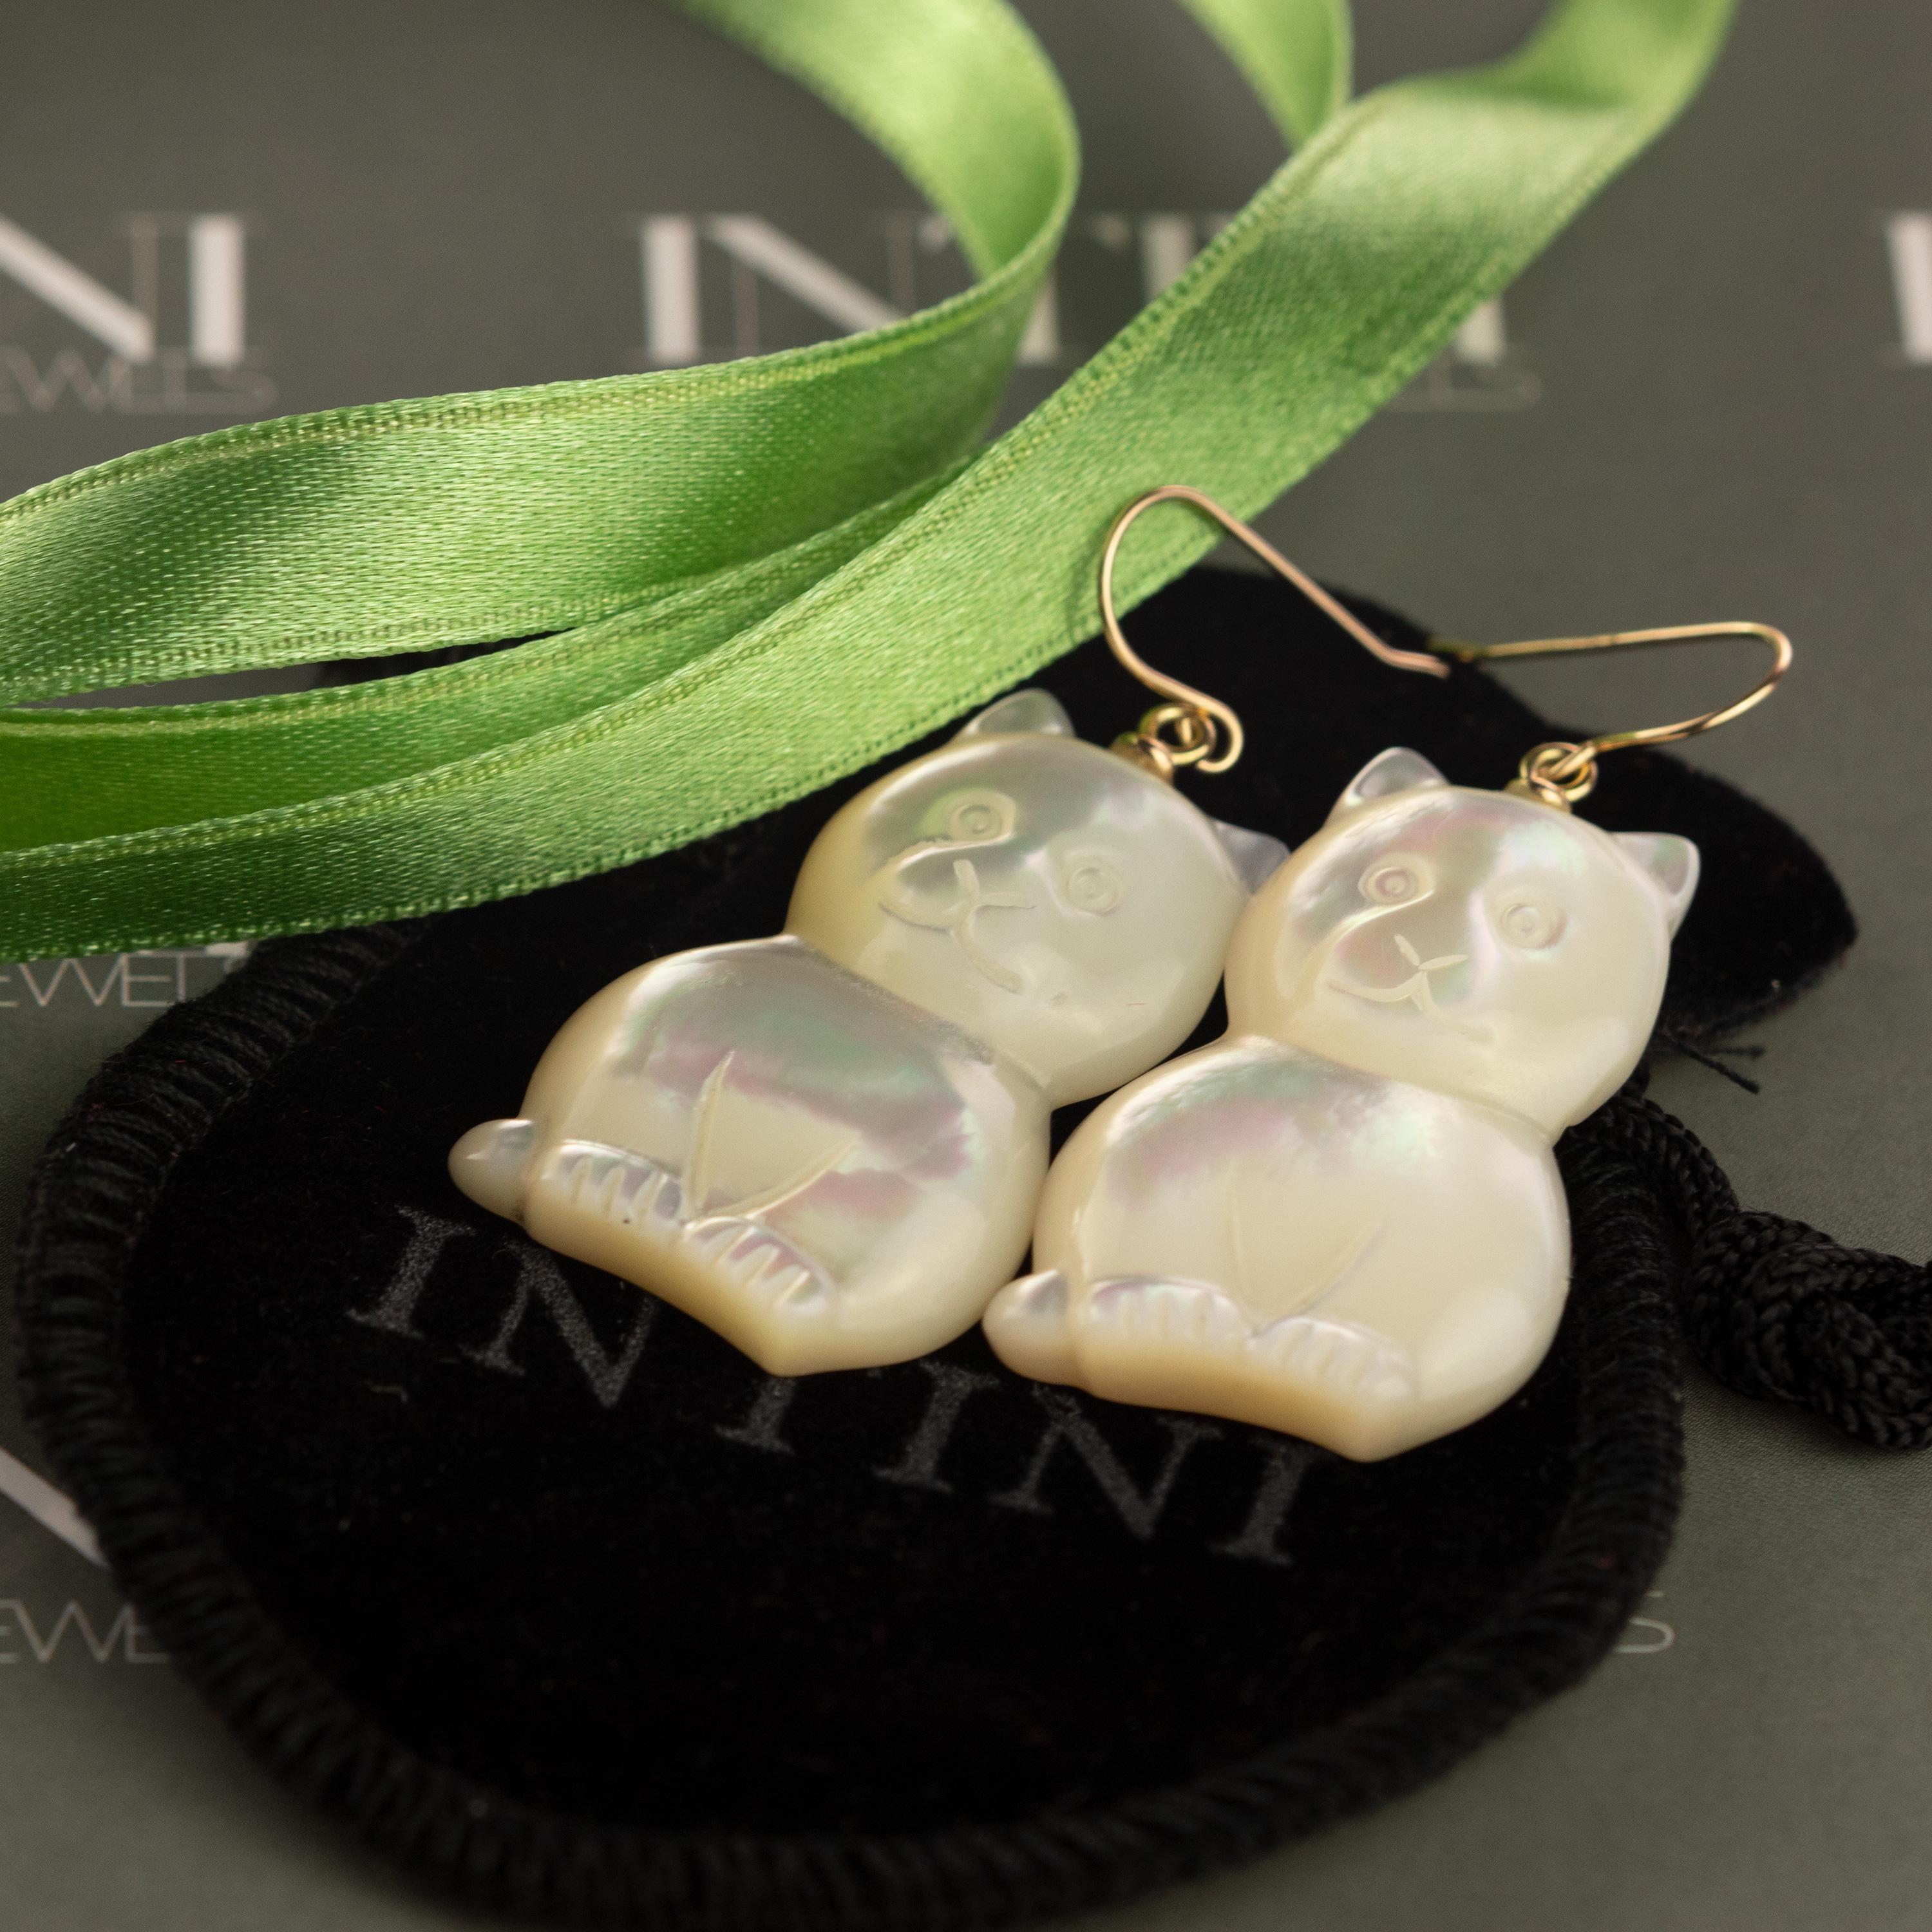 Stunning unique piece. Mother of pearl earrings with an amazing cat, feline or animal shaped form. Marvelous jewel with 18 karat yellow gold setting. Drop, chic and handmade earrings

Mother of Pearl brings the gentle healing power of the sea. It is